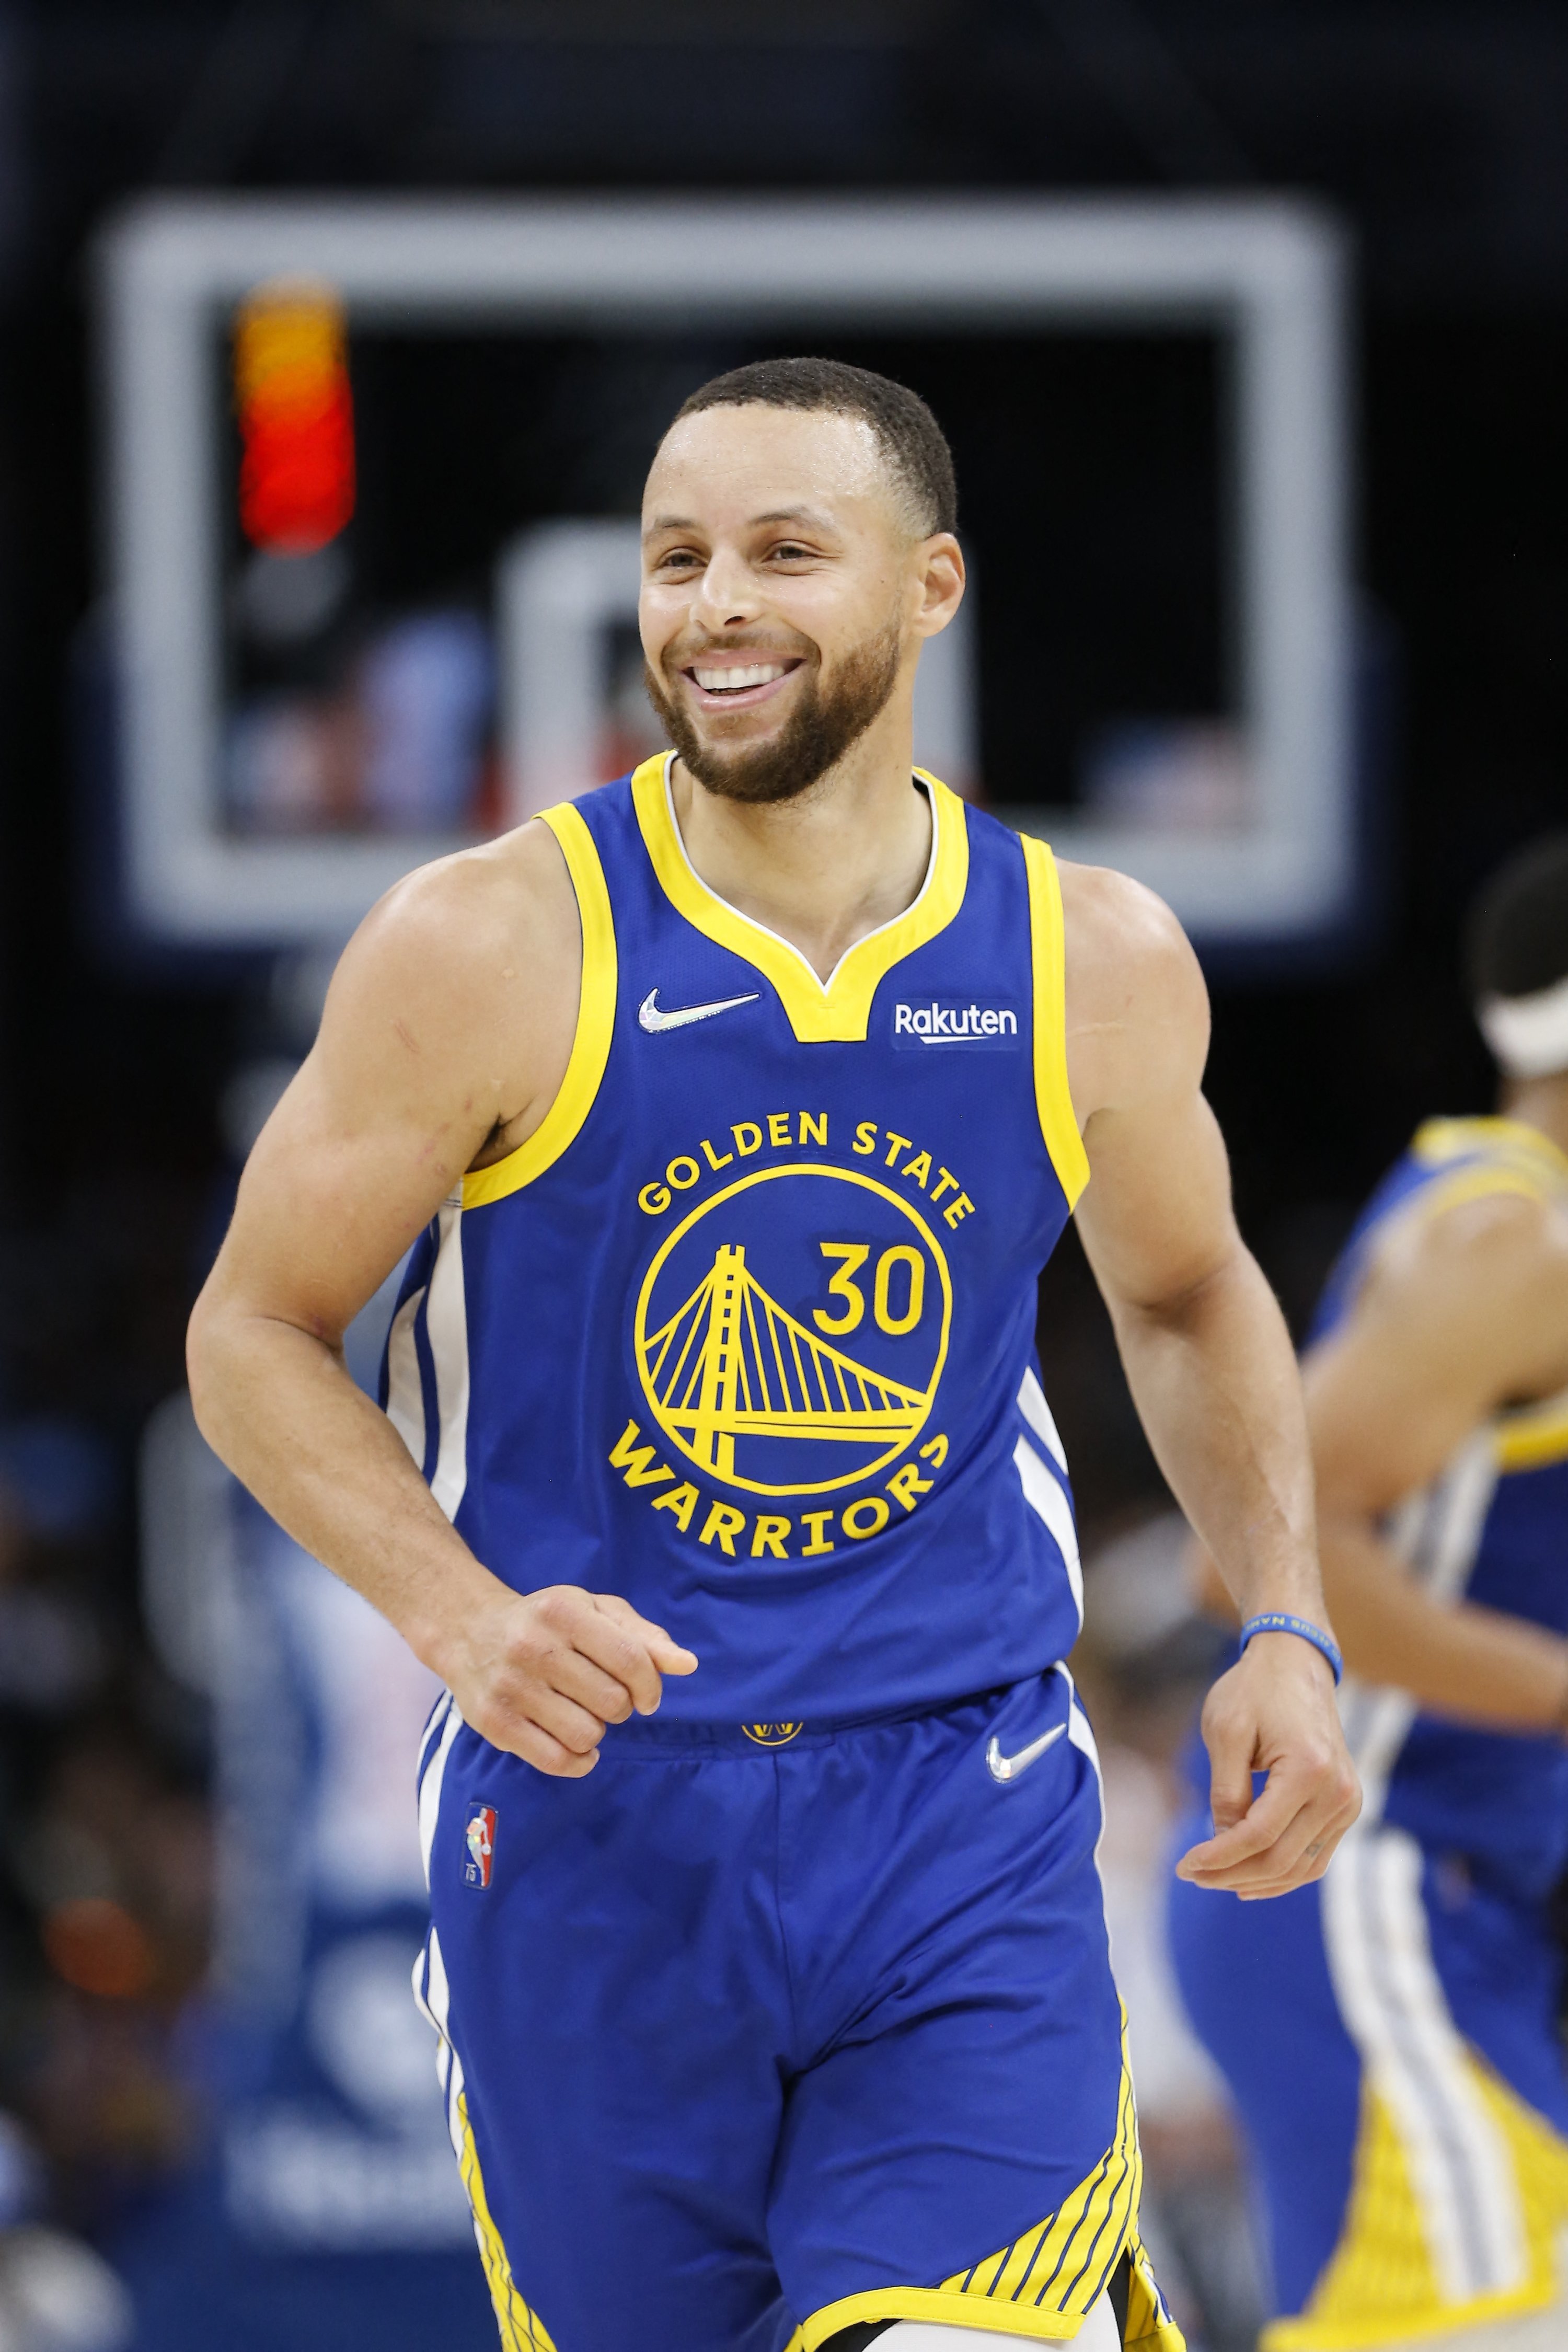 Golden State Warriors guard Stephen Curry smiles after scoring in an NBA game against the Oklahoma City Thunder, Oklahoma City, Oklahoma, U.S., Feb 7, 2022. (Reuters Photo)